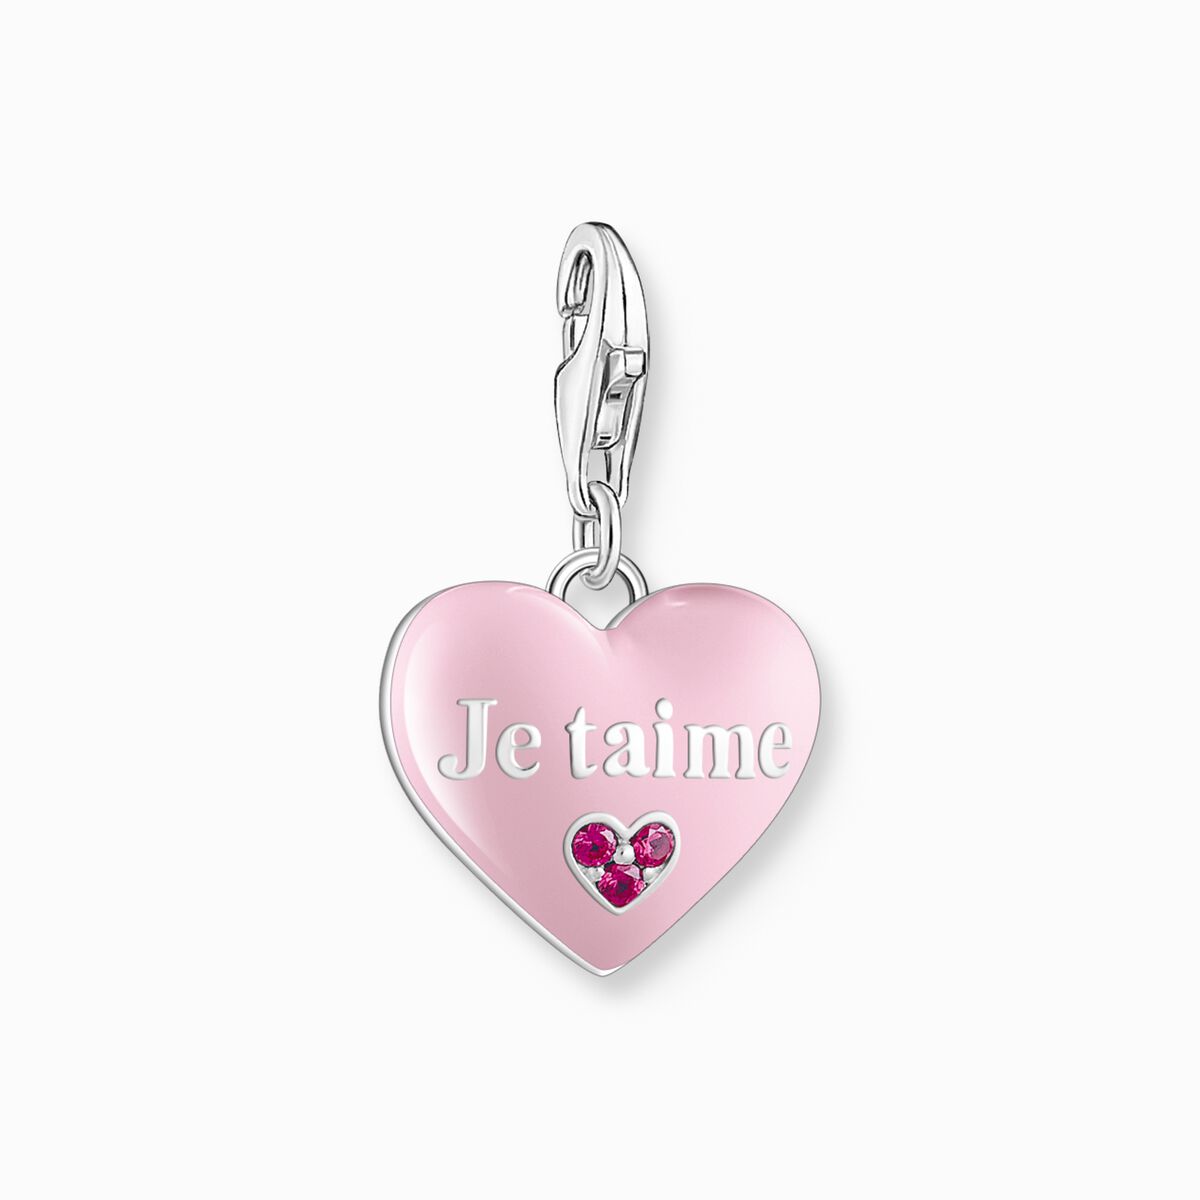 Silver charm pendant with pink heart